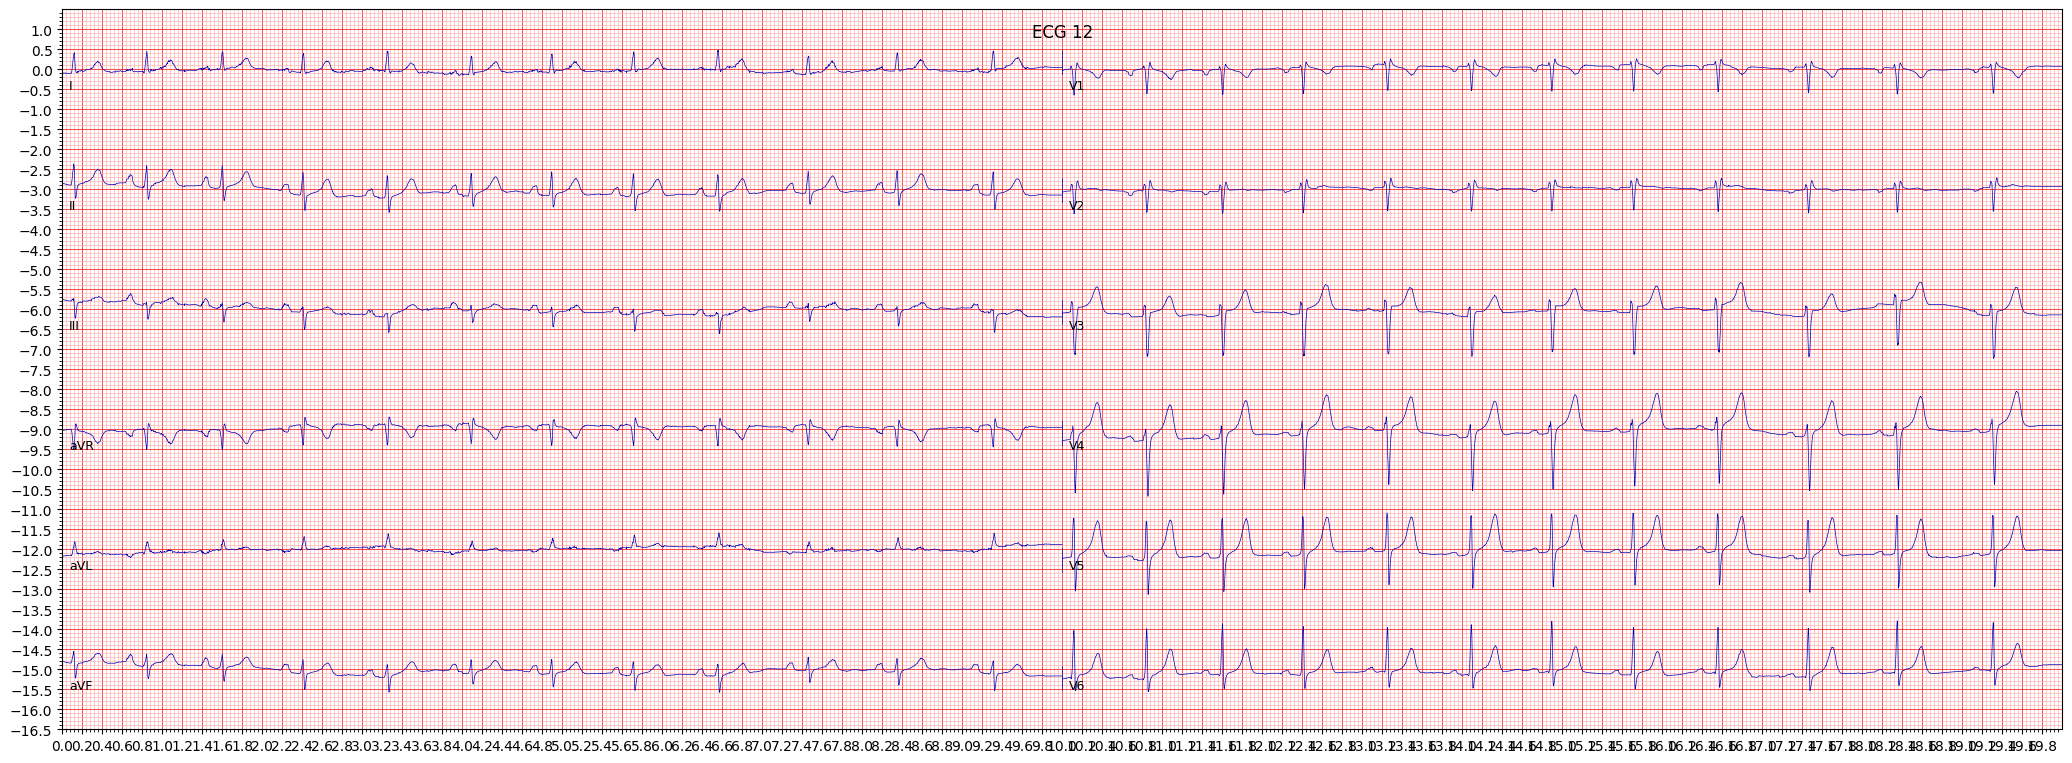 incomplete right bundle branch block (IRBBB) example 785